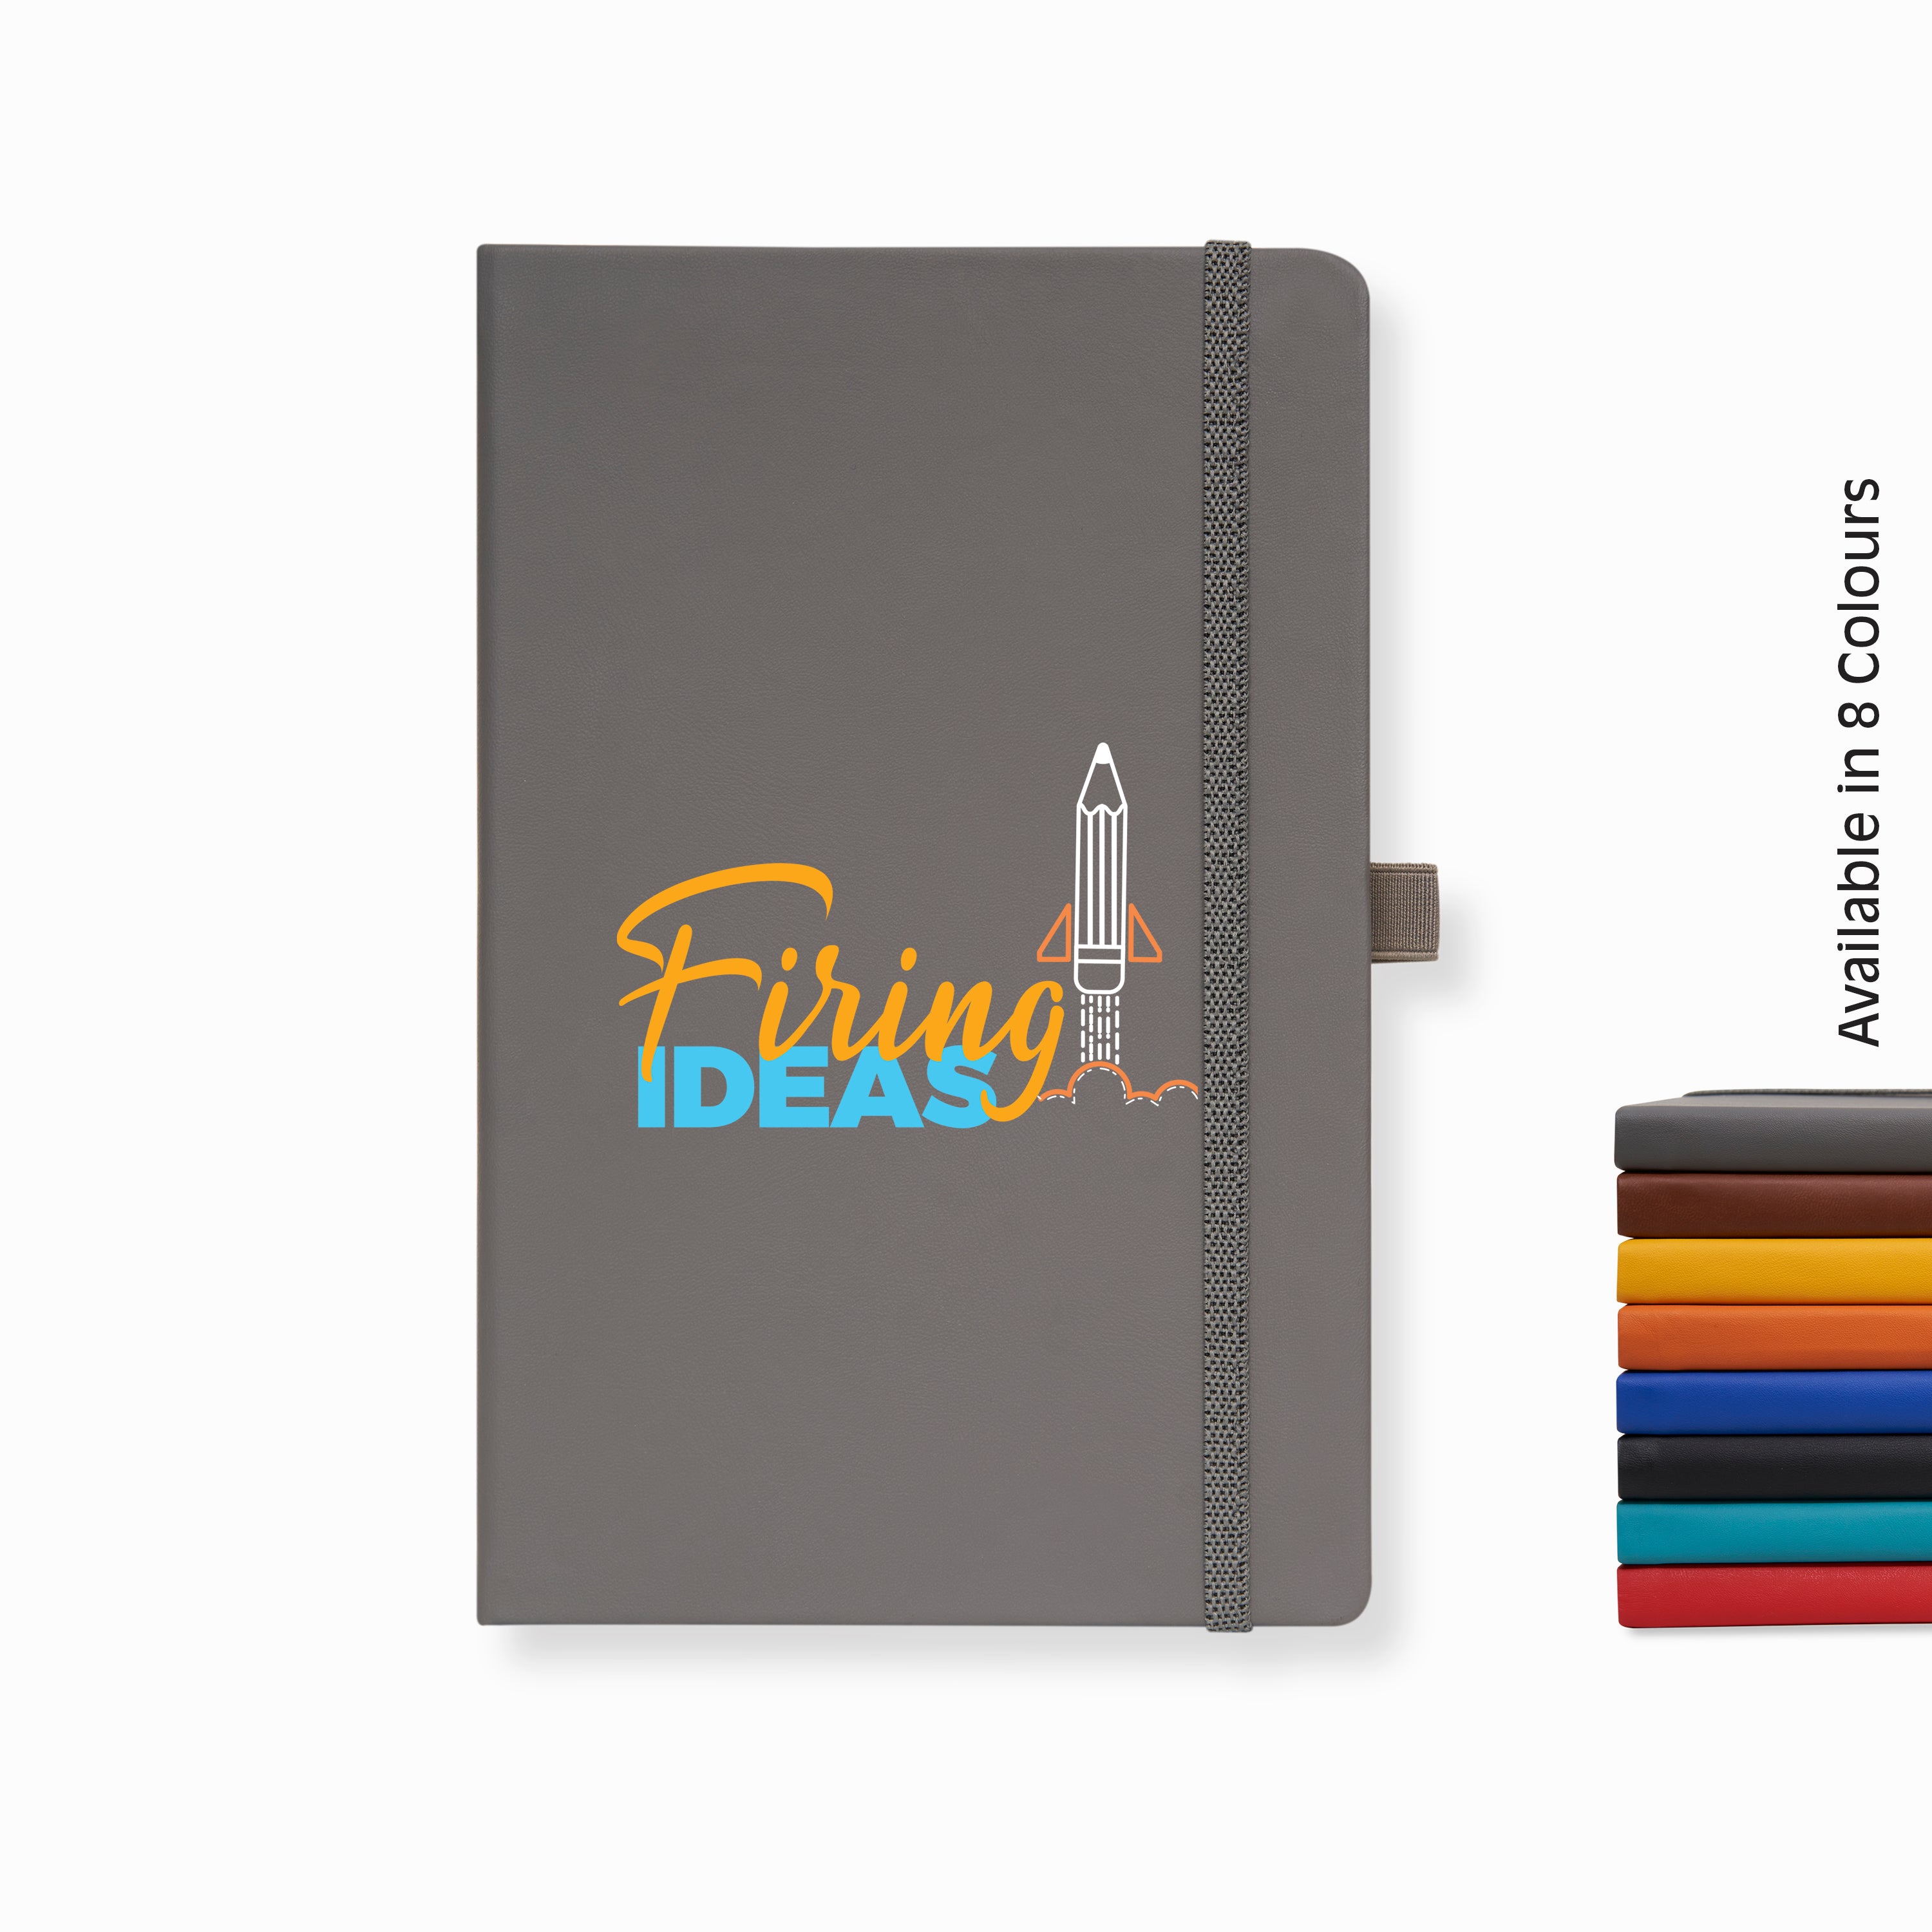 Doodle Pro Series Executive A5 PU Leather Hardbound Ruled Grey Notebook with Pen Loop [Firing Ideas]